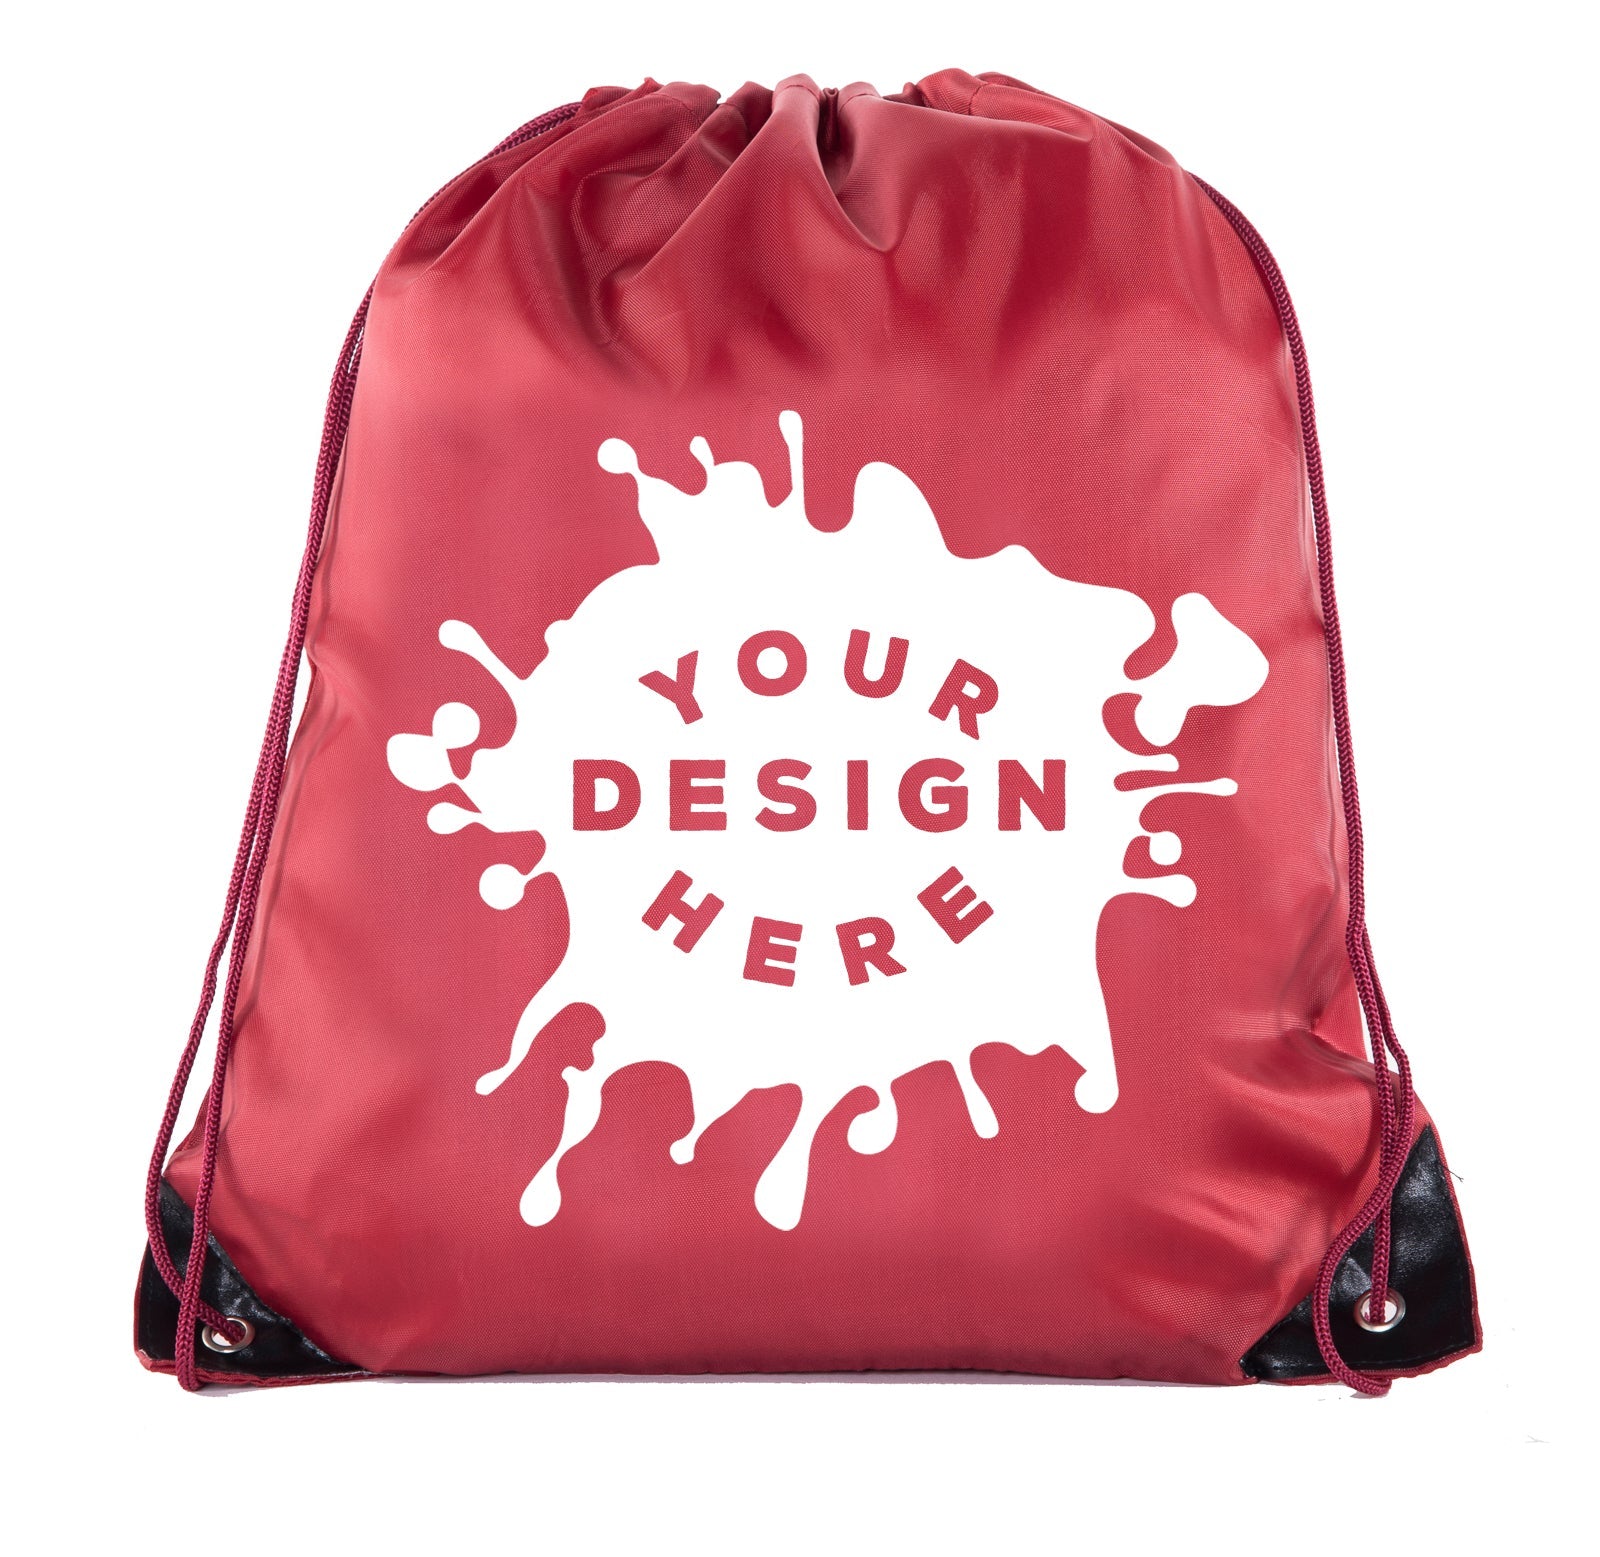 EDITED SIZE in comment* DIY drawstring bag with double handle